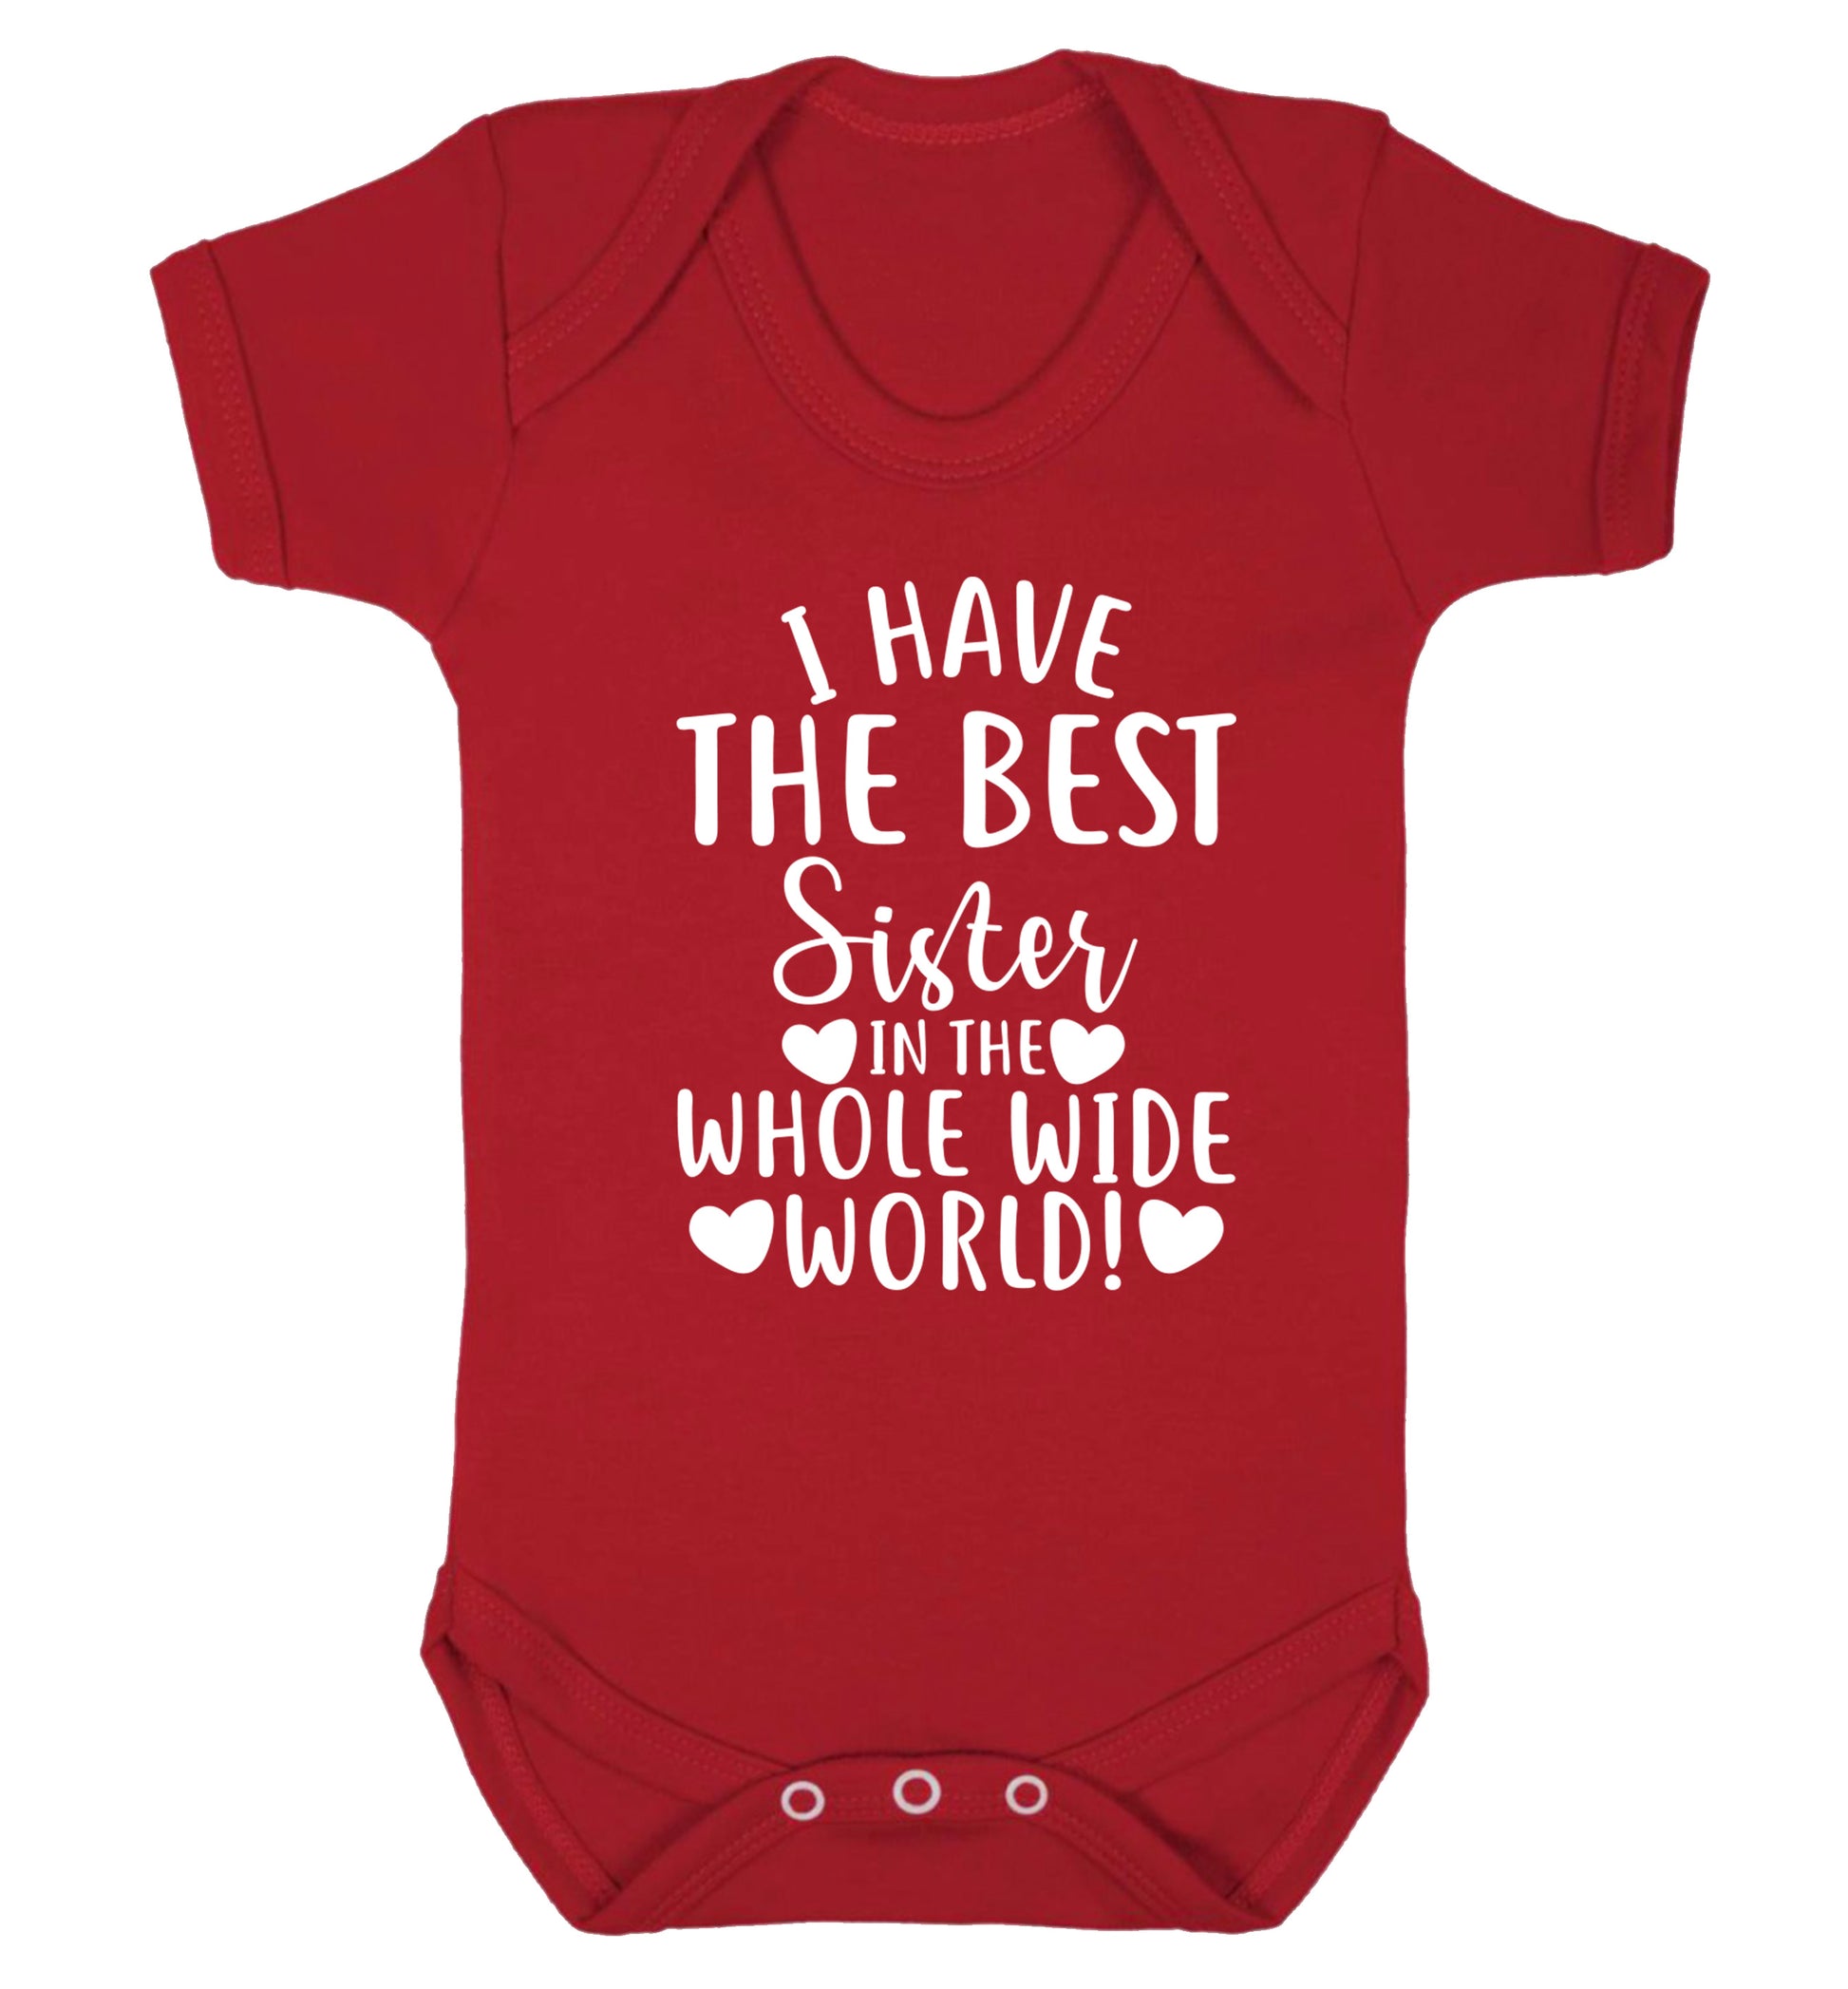 I have the best sister in the whole wide world! Baby Vest red 18-24 months